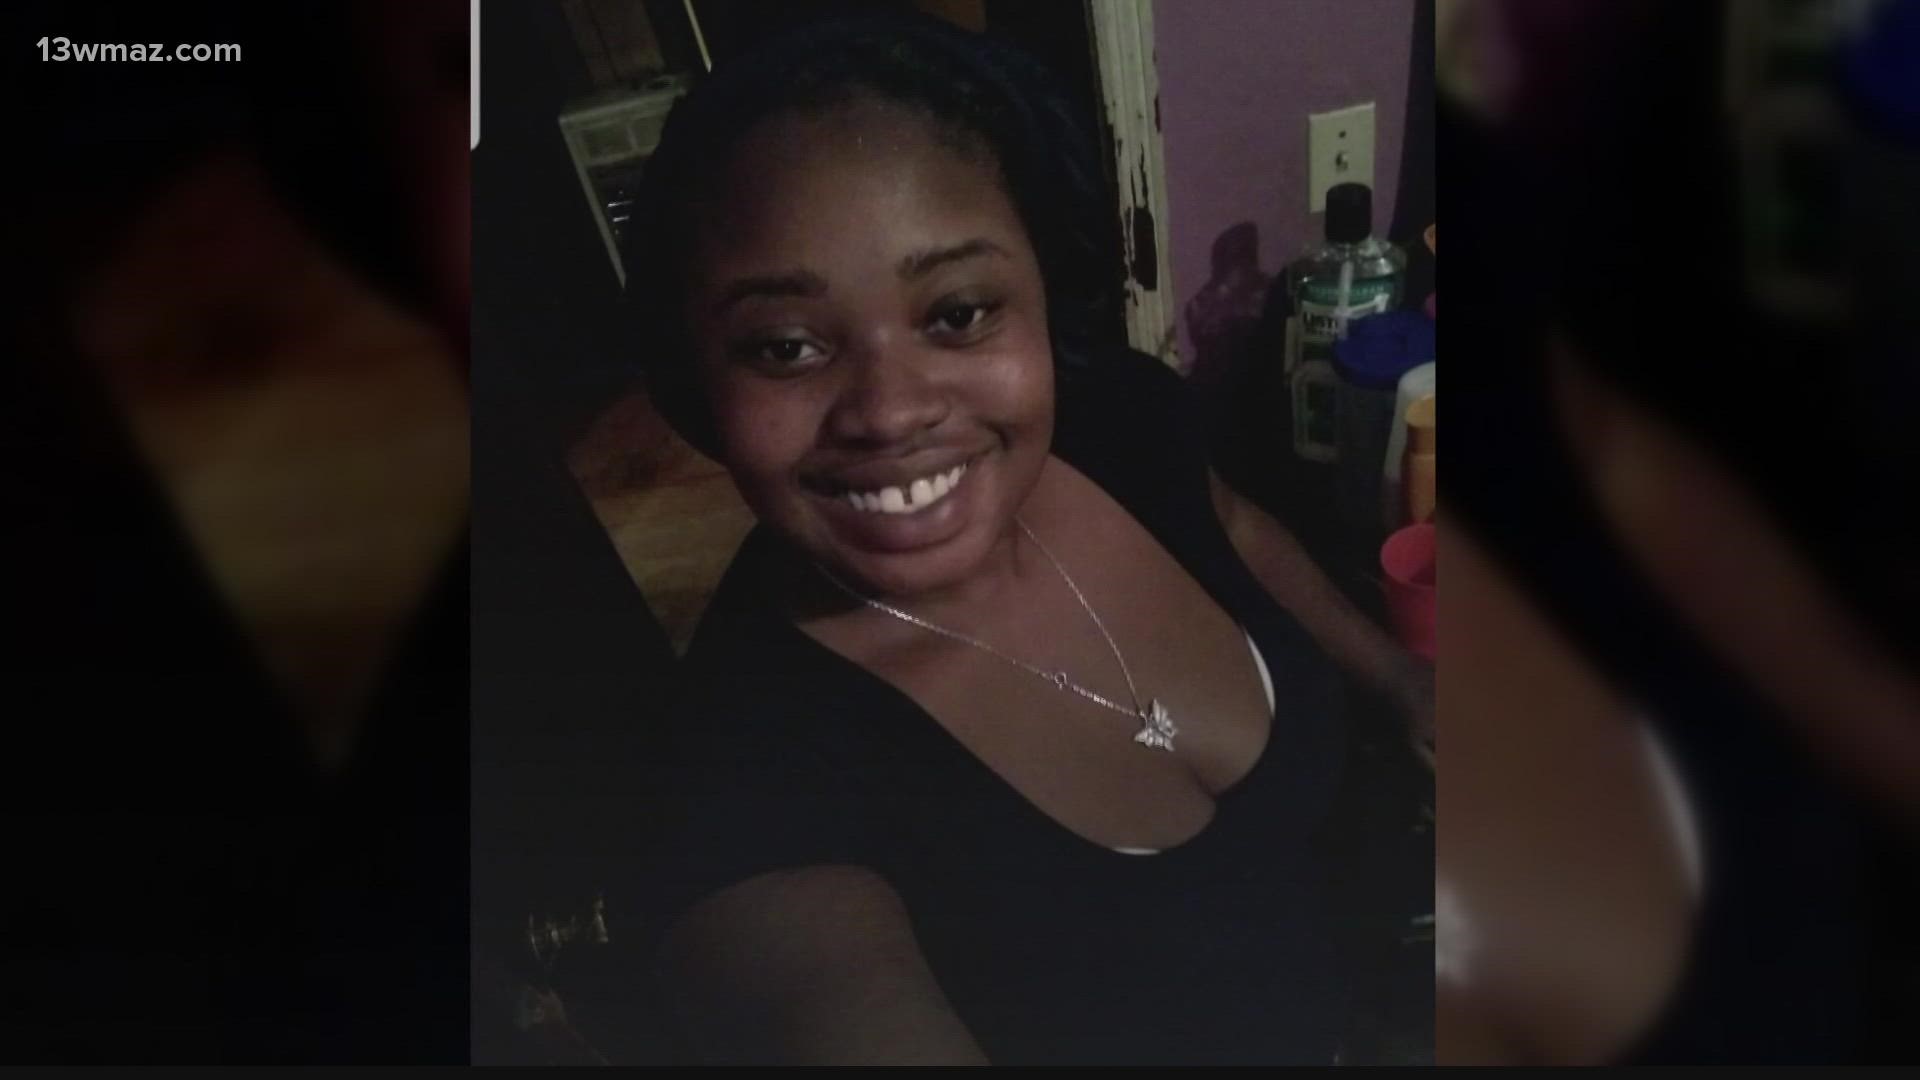 They said they completed their look at the July 15 arrest that led to Brianna Grier's death.